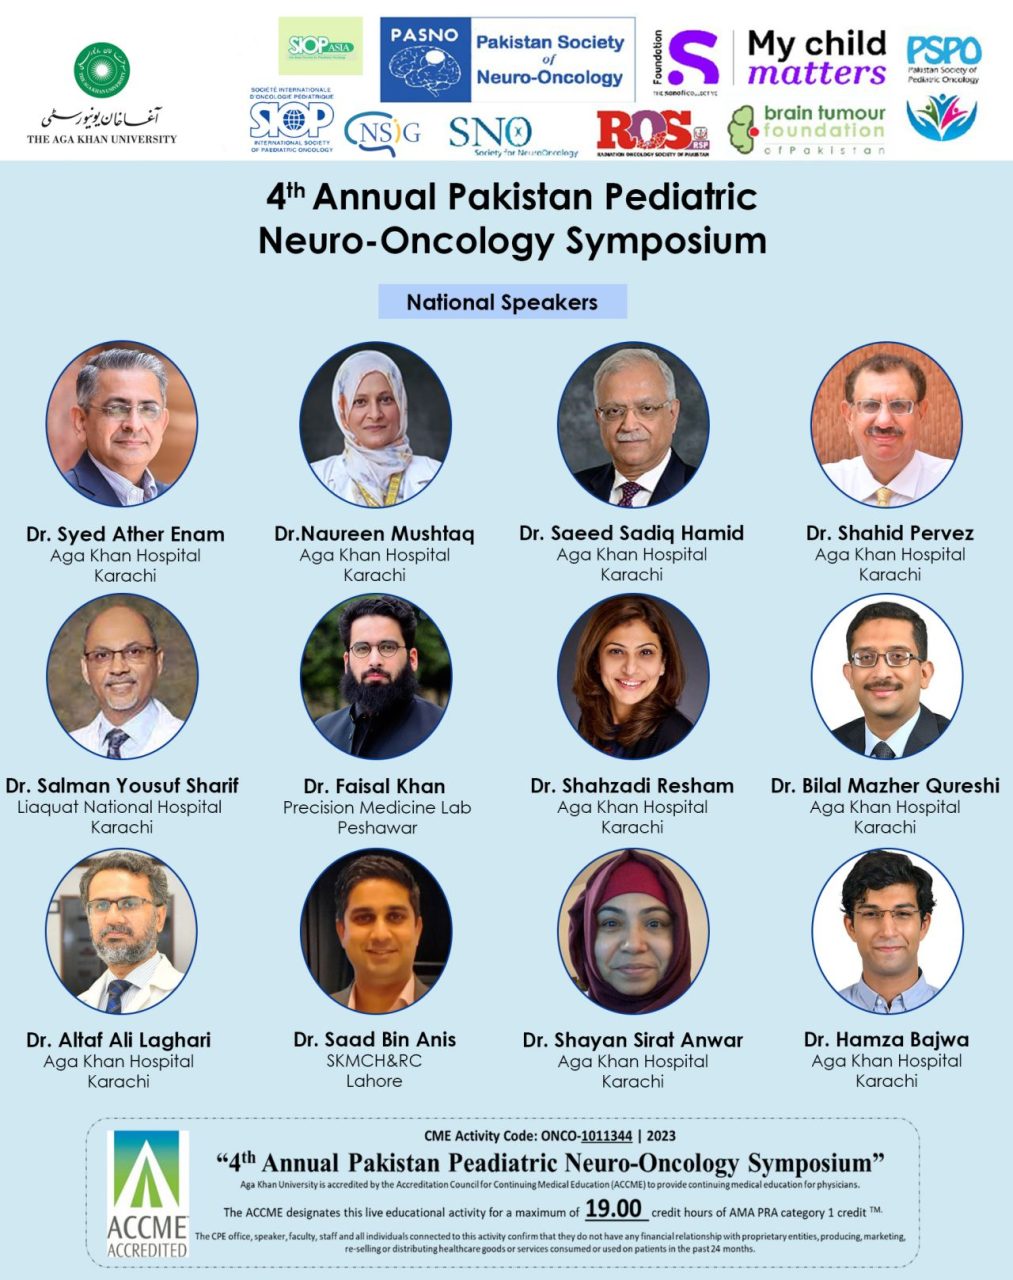 The 4th Annual Pakistan Pediatric Neuro-Oncology Symposium National Speakers! – Pakistan Society of Neuro-oncology